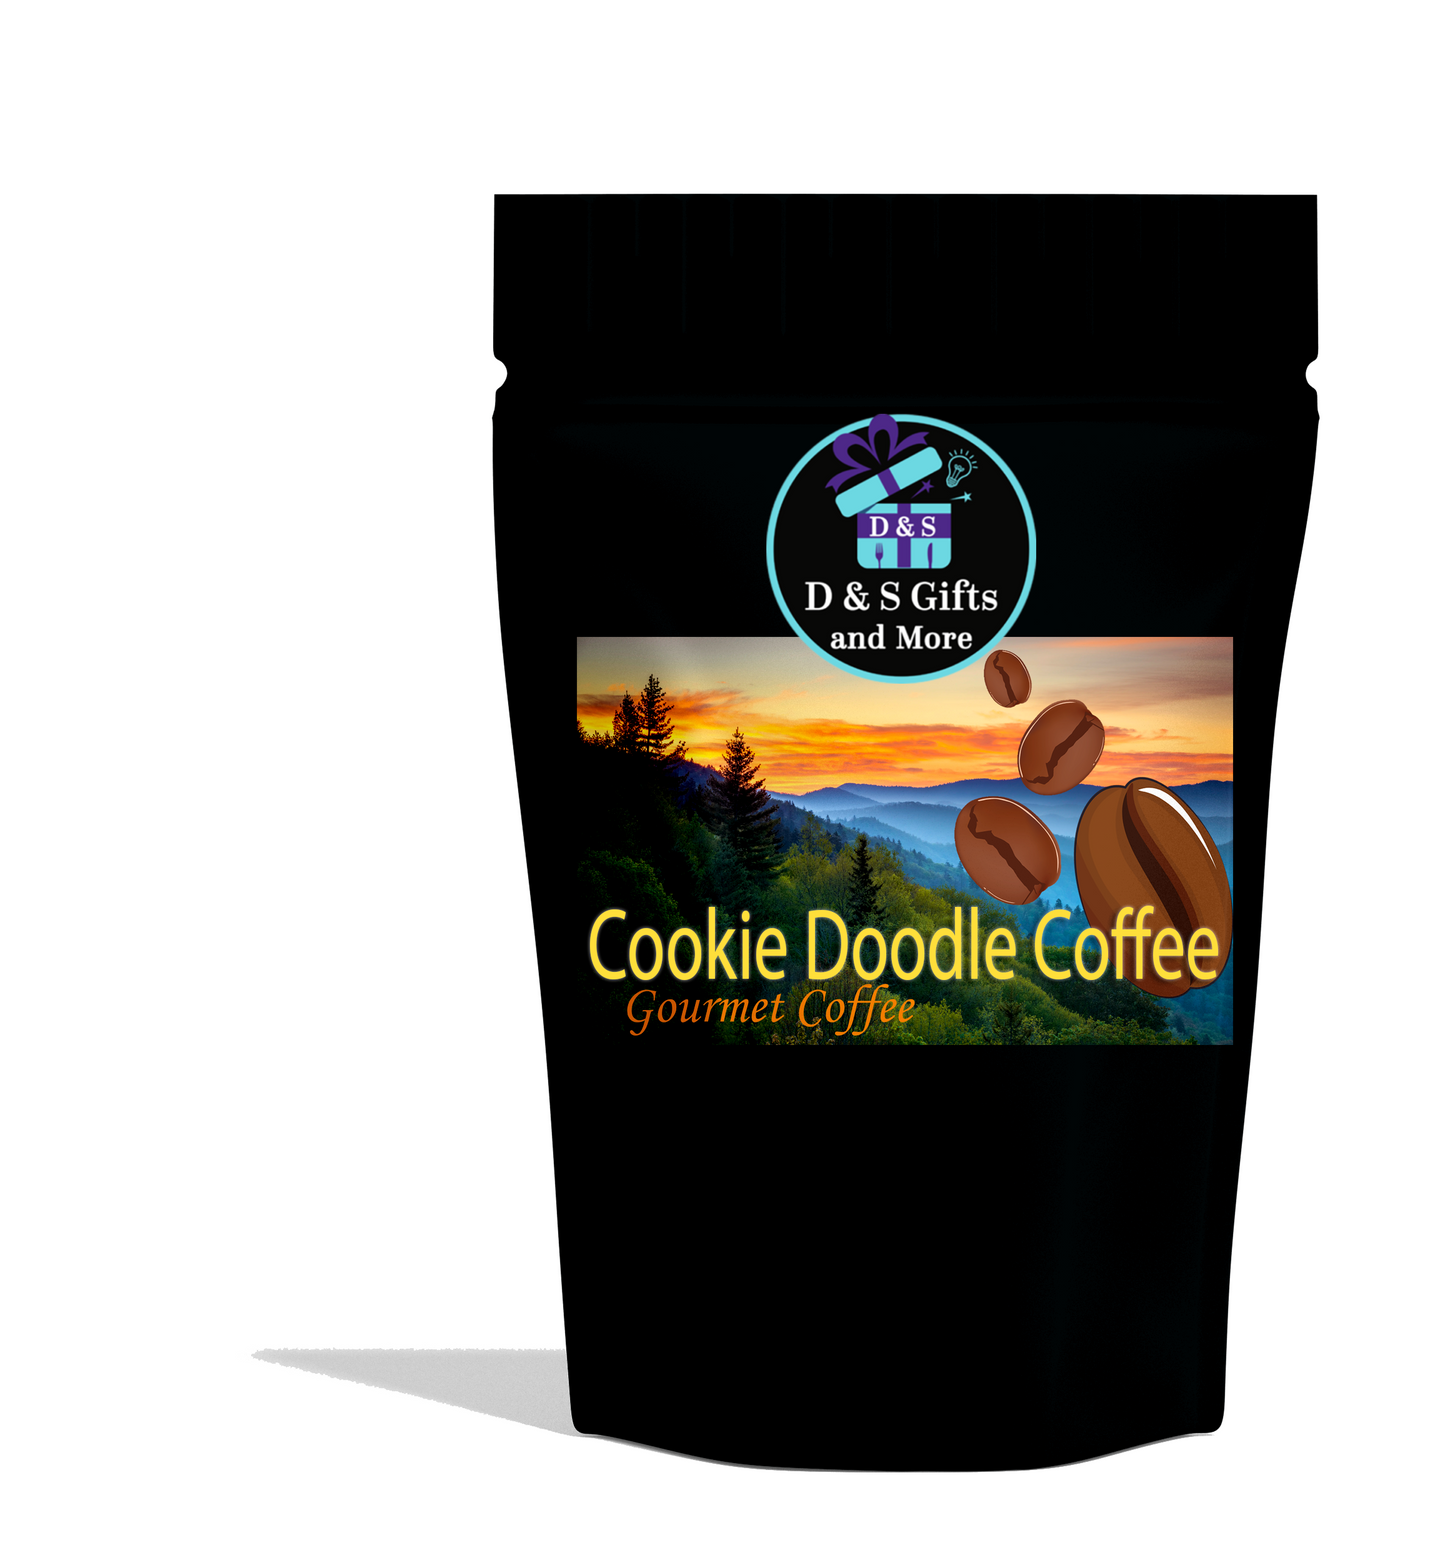 Cookie Doodle Coffee